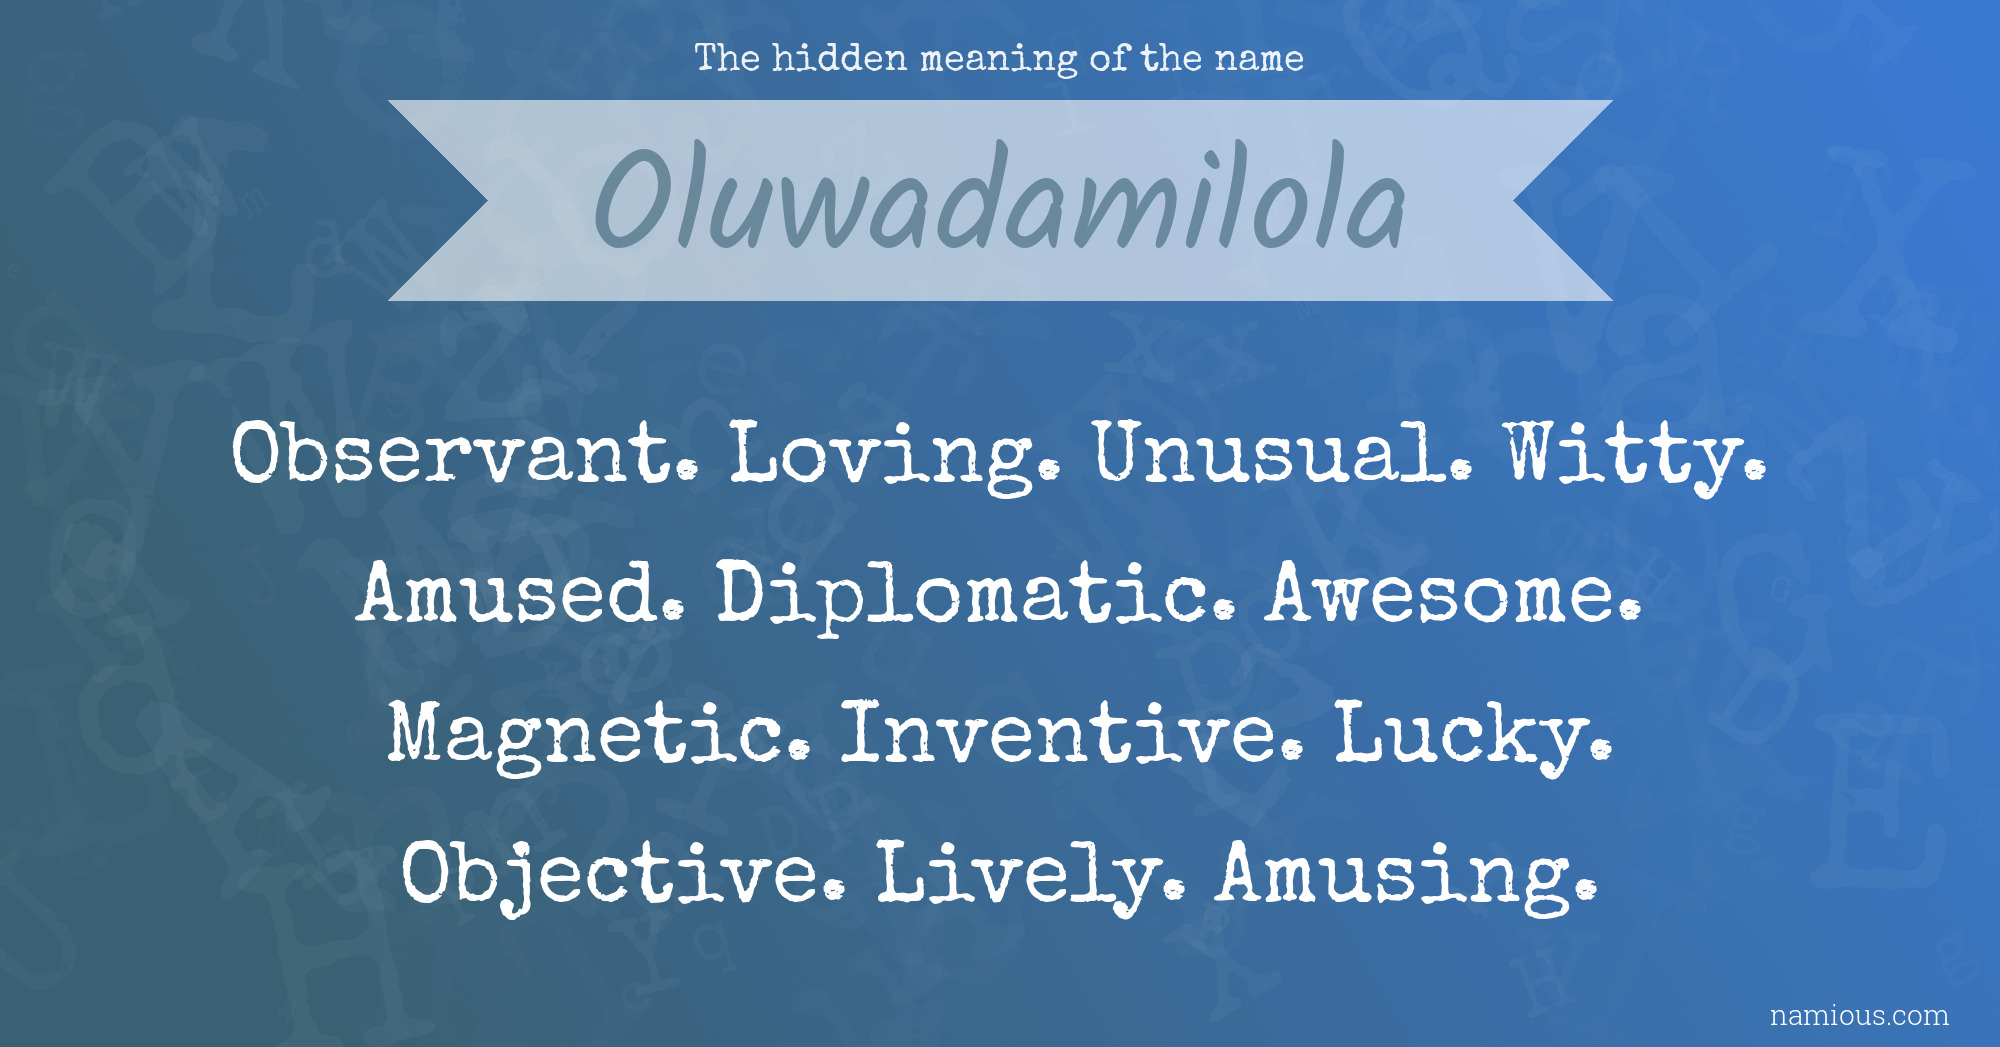 The hidden meaning of the name Oluwadamilola